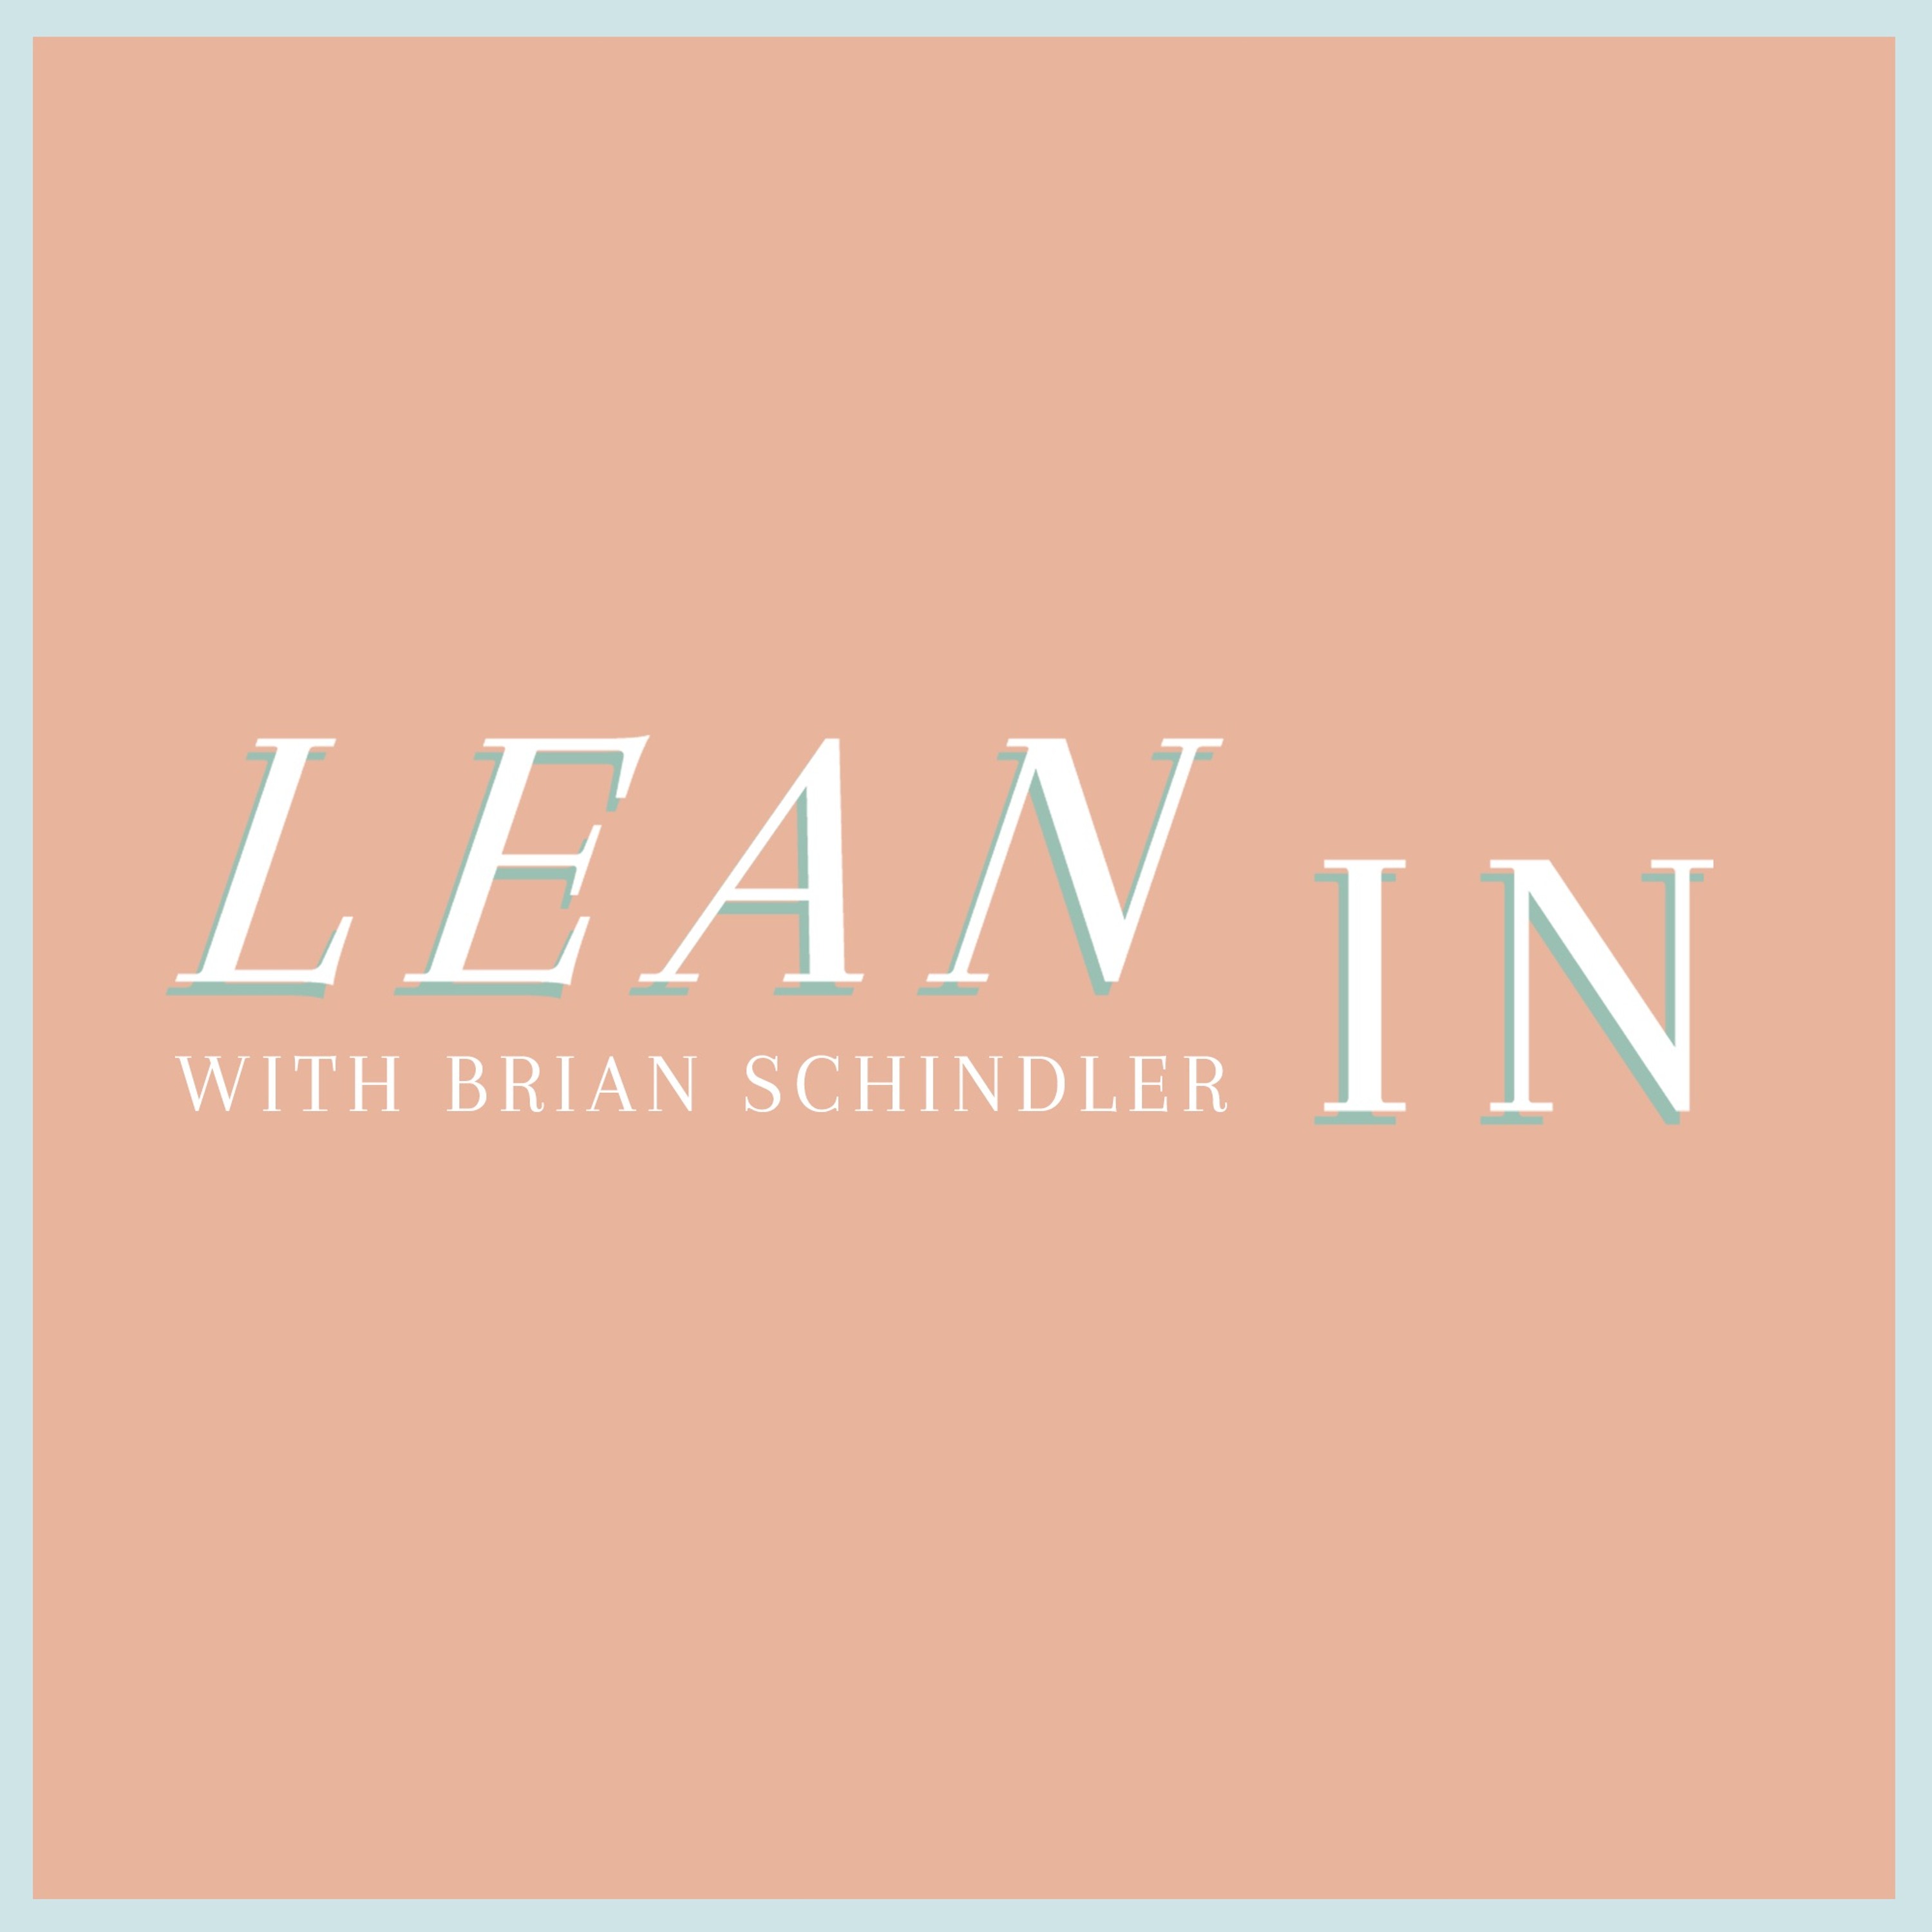 Lean In - Episode 009 - "I'll never" and Forgiveness - Brian Schindler and Cavanaugh James